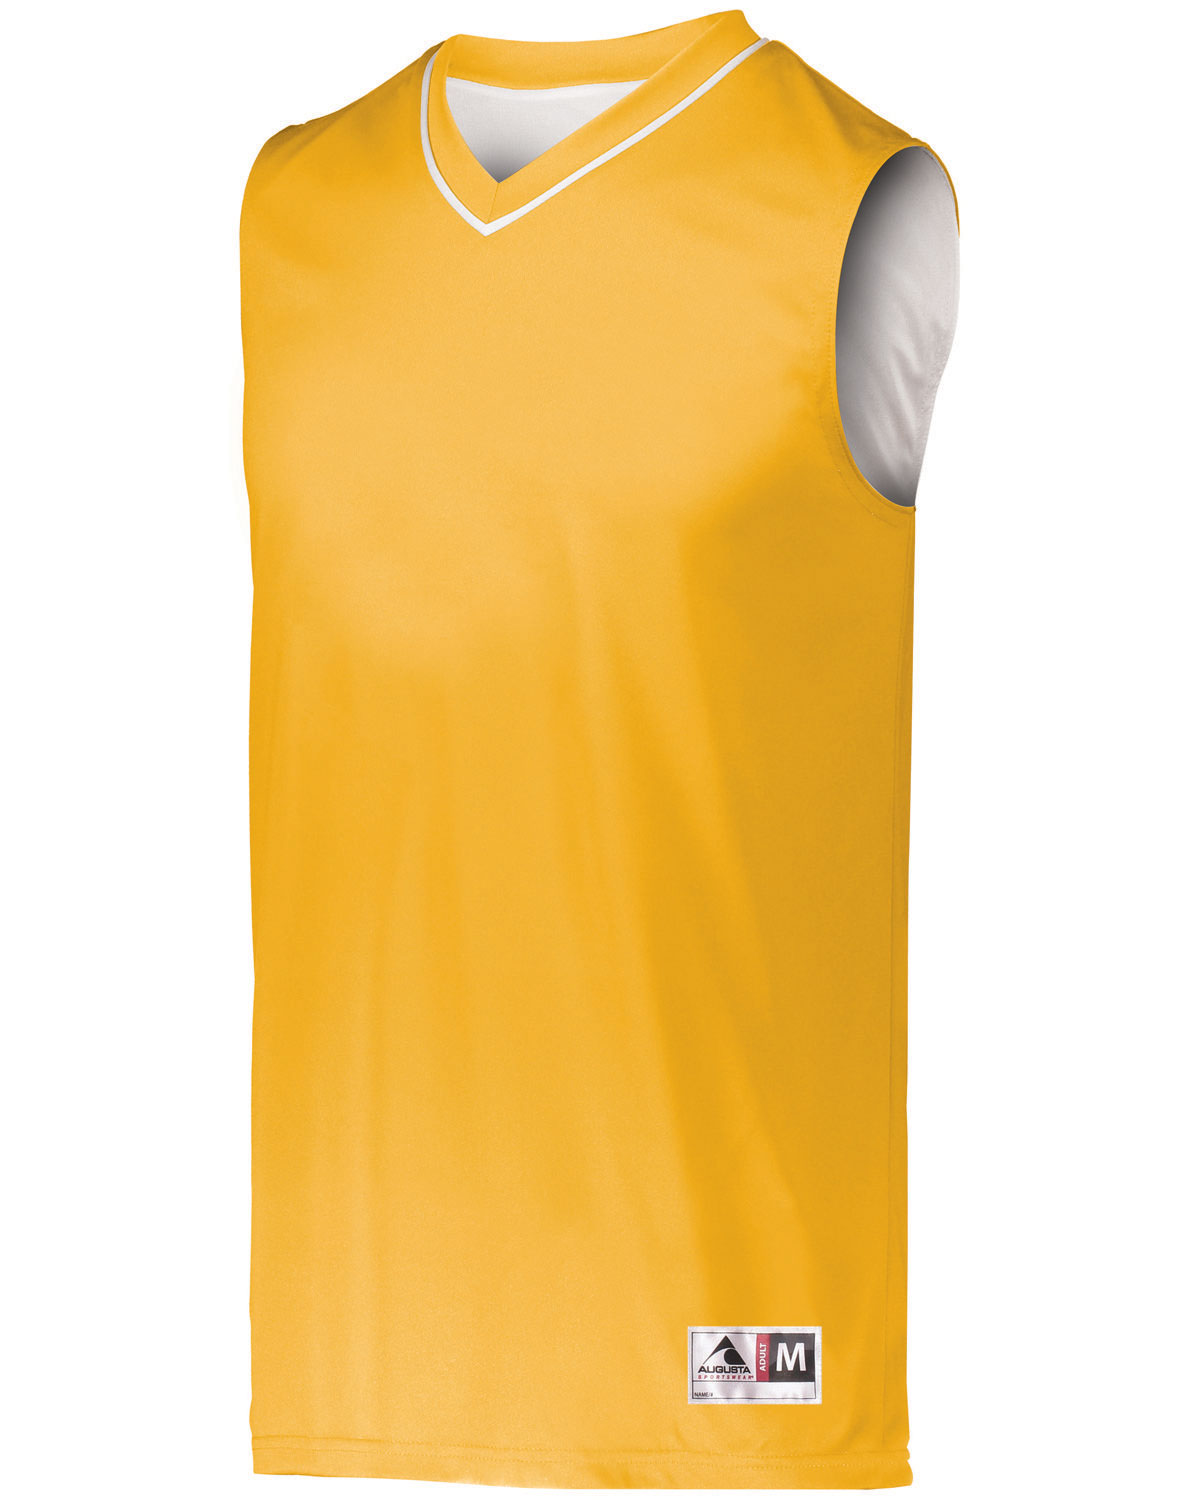 Adult Reversible Two-Color Sleeveless Jersey